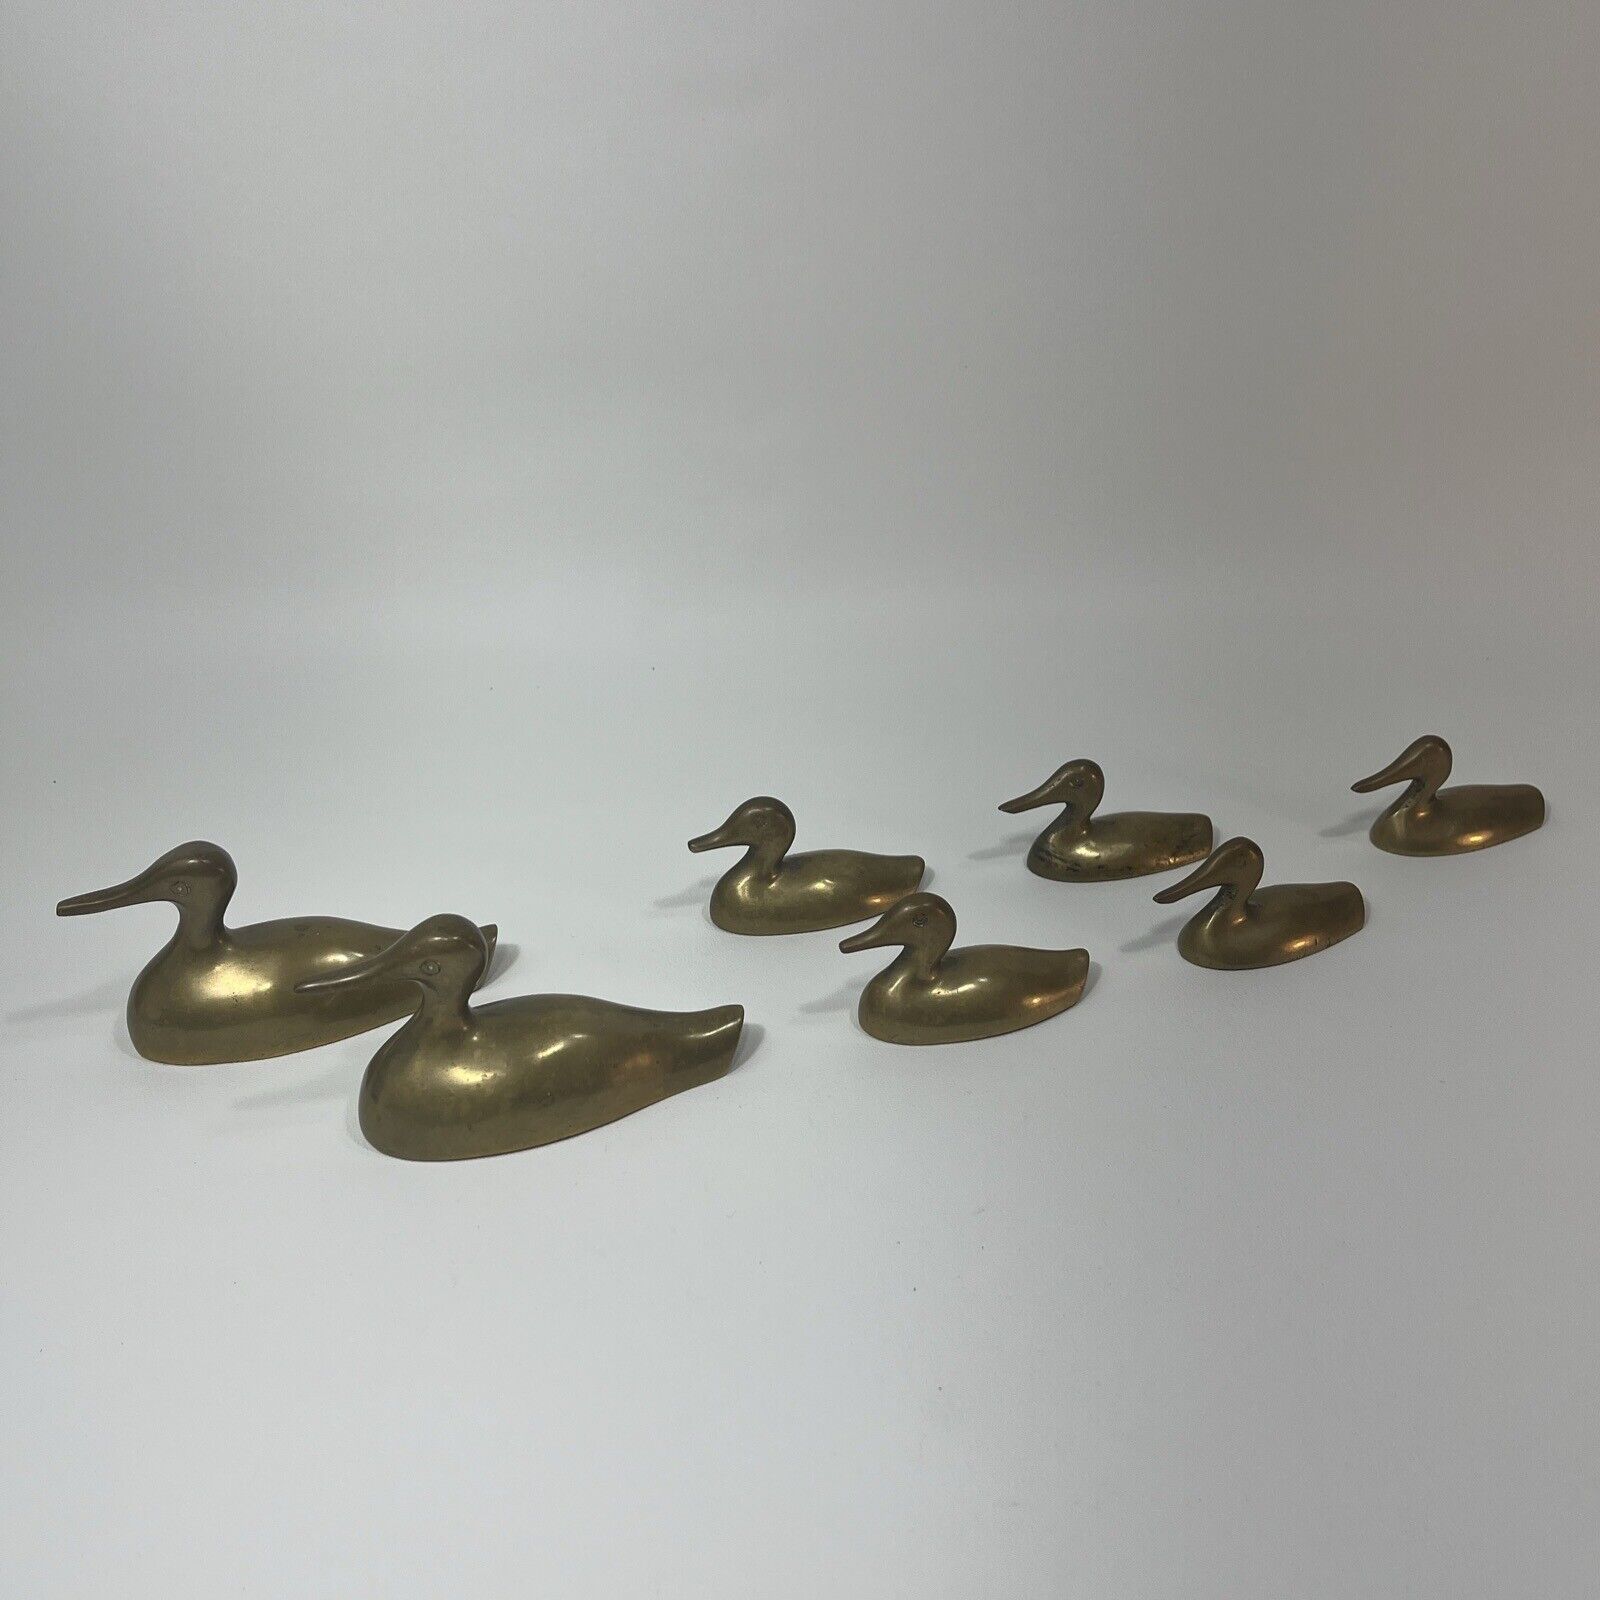 Lot of 7 Small Brass Ducks Gaggle Flock Family Swimming paddling MCM paperweight